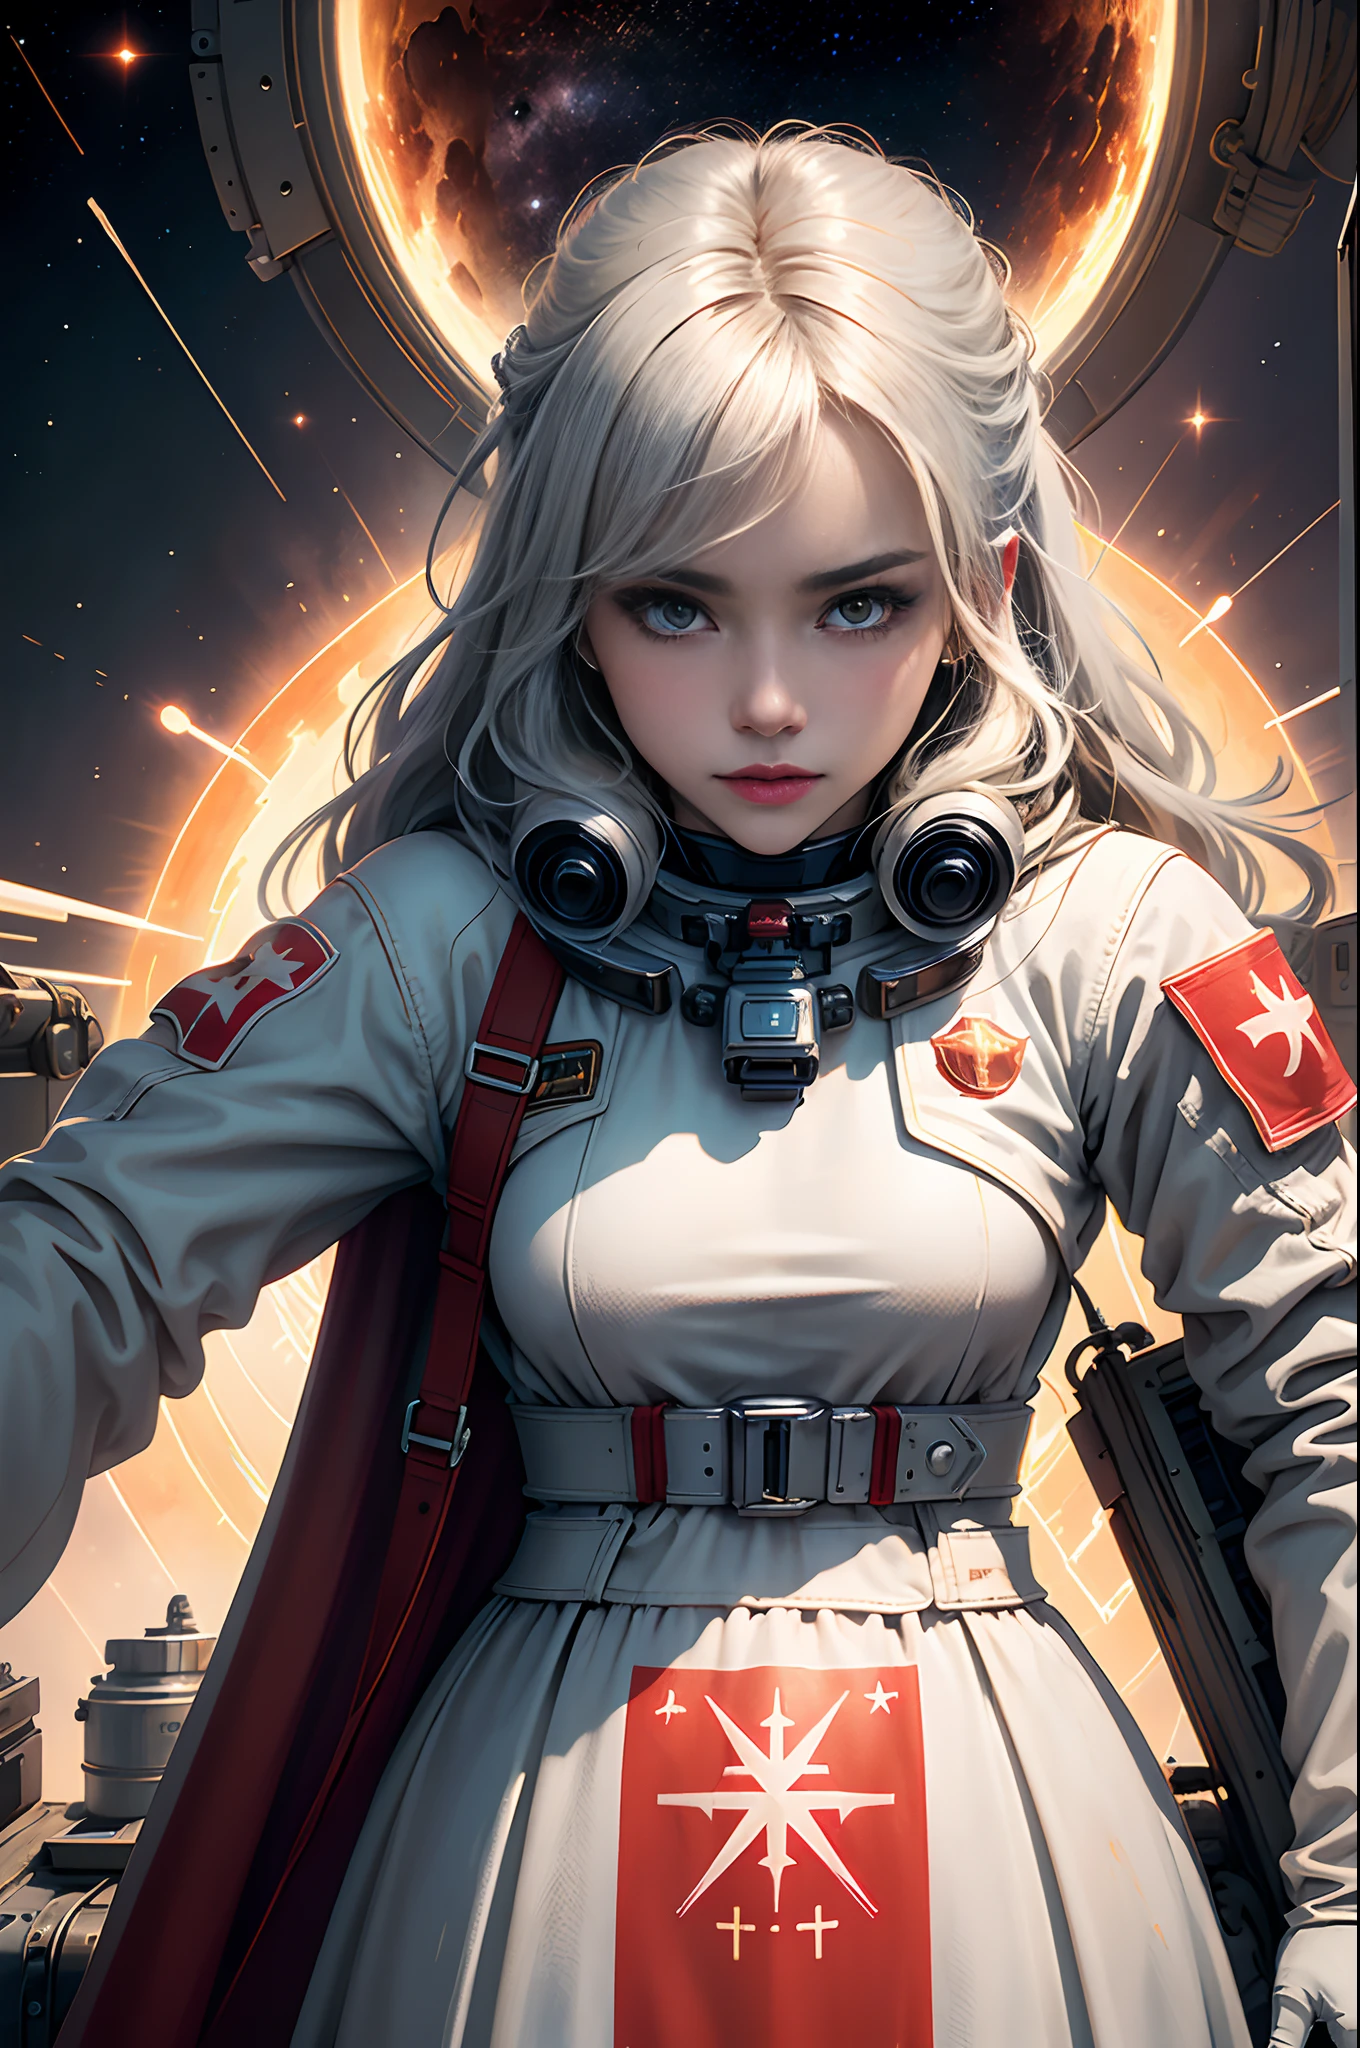 high quality, 8K Ultra HD, high detailed, 1Girl,flat_pectorals,Cute,Beautiful detailed eyes,shiny hair,You can see it through the hair.,Hair between eyes, CCCPposter, sovietposter,Red monochrome,USSR Poster, soviet,communism, black_heads,red_eyes,Vampire,teenage,Middle breast,space suit:orange_Clothing_Body:jumpsuit),white_glove, white_space shoes, white_helmet, CCCP red letter on the top of the helmet, zero gravity, sidelit, reflection, The person in the spacesuit is in the lower left corner of the frame, The right hand is outstretched, The right hand gently touches the Salyut space station), Space station in the upper right corner of the screen, Light reflected from the sun, Silver metal,red flag, brilliance,Soviet style, diffuse reflection, Metallic texture, The vista is the blue earth,in mecha style,Sea of Stars,Treble, majestueux